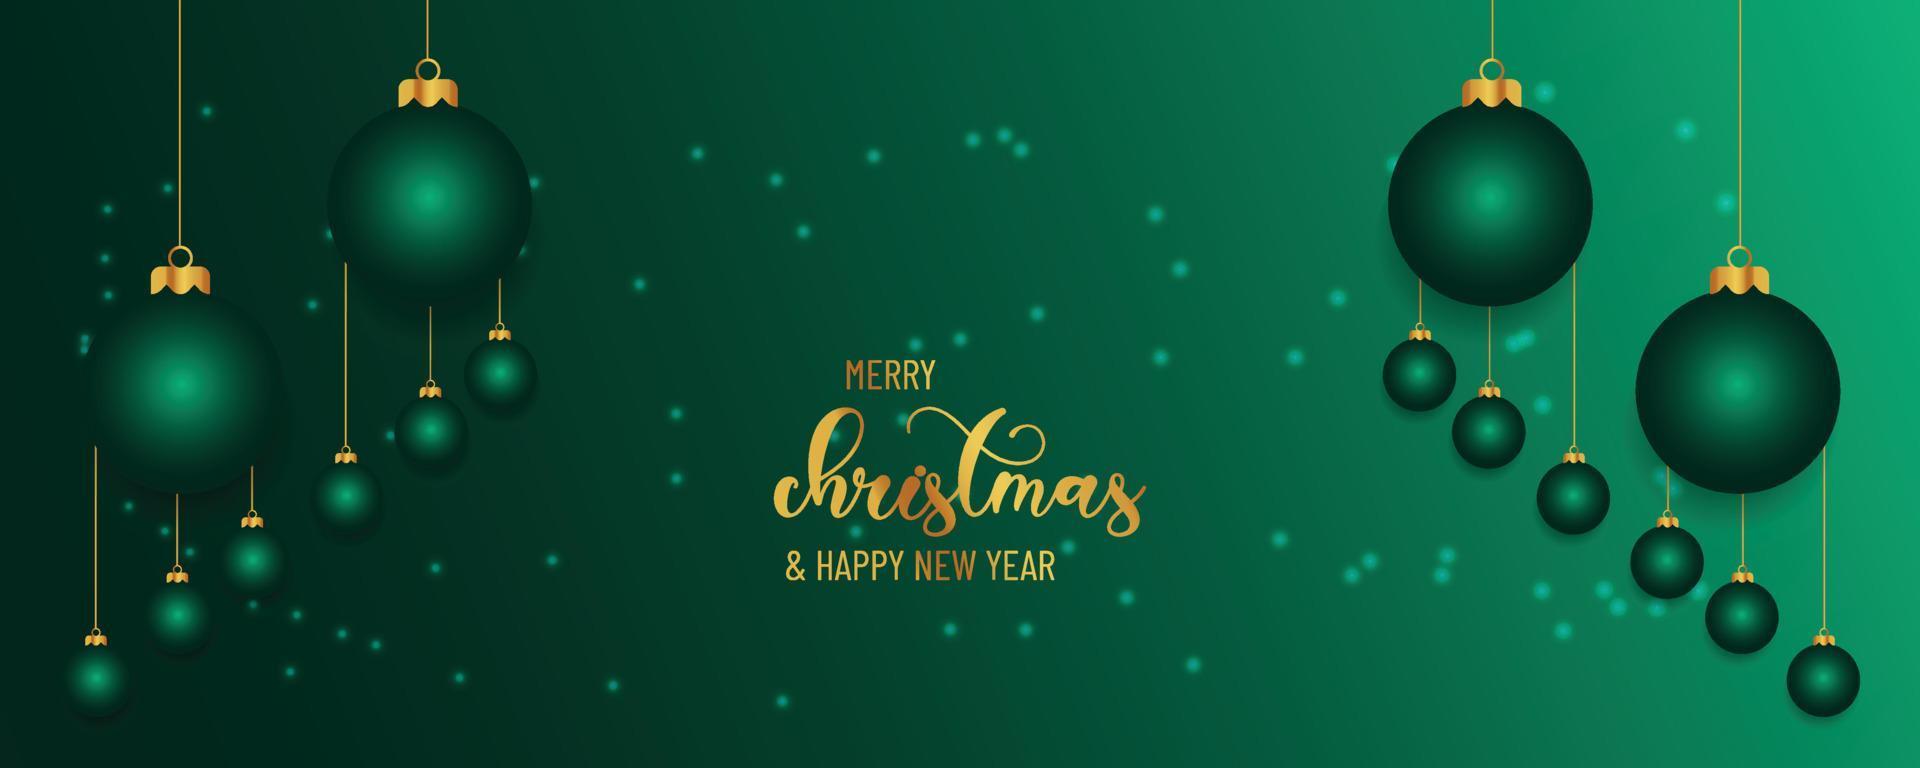 Christmas background design of pine tree and snowflake with beautiful christmas balls banner with text space vector illustration